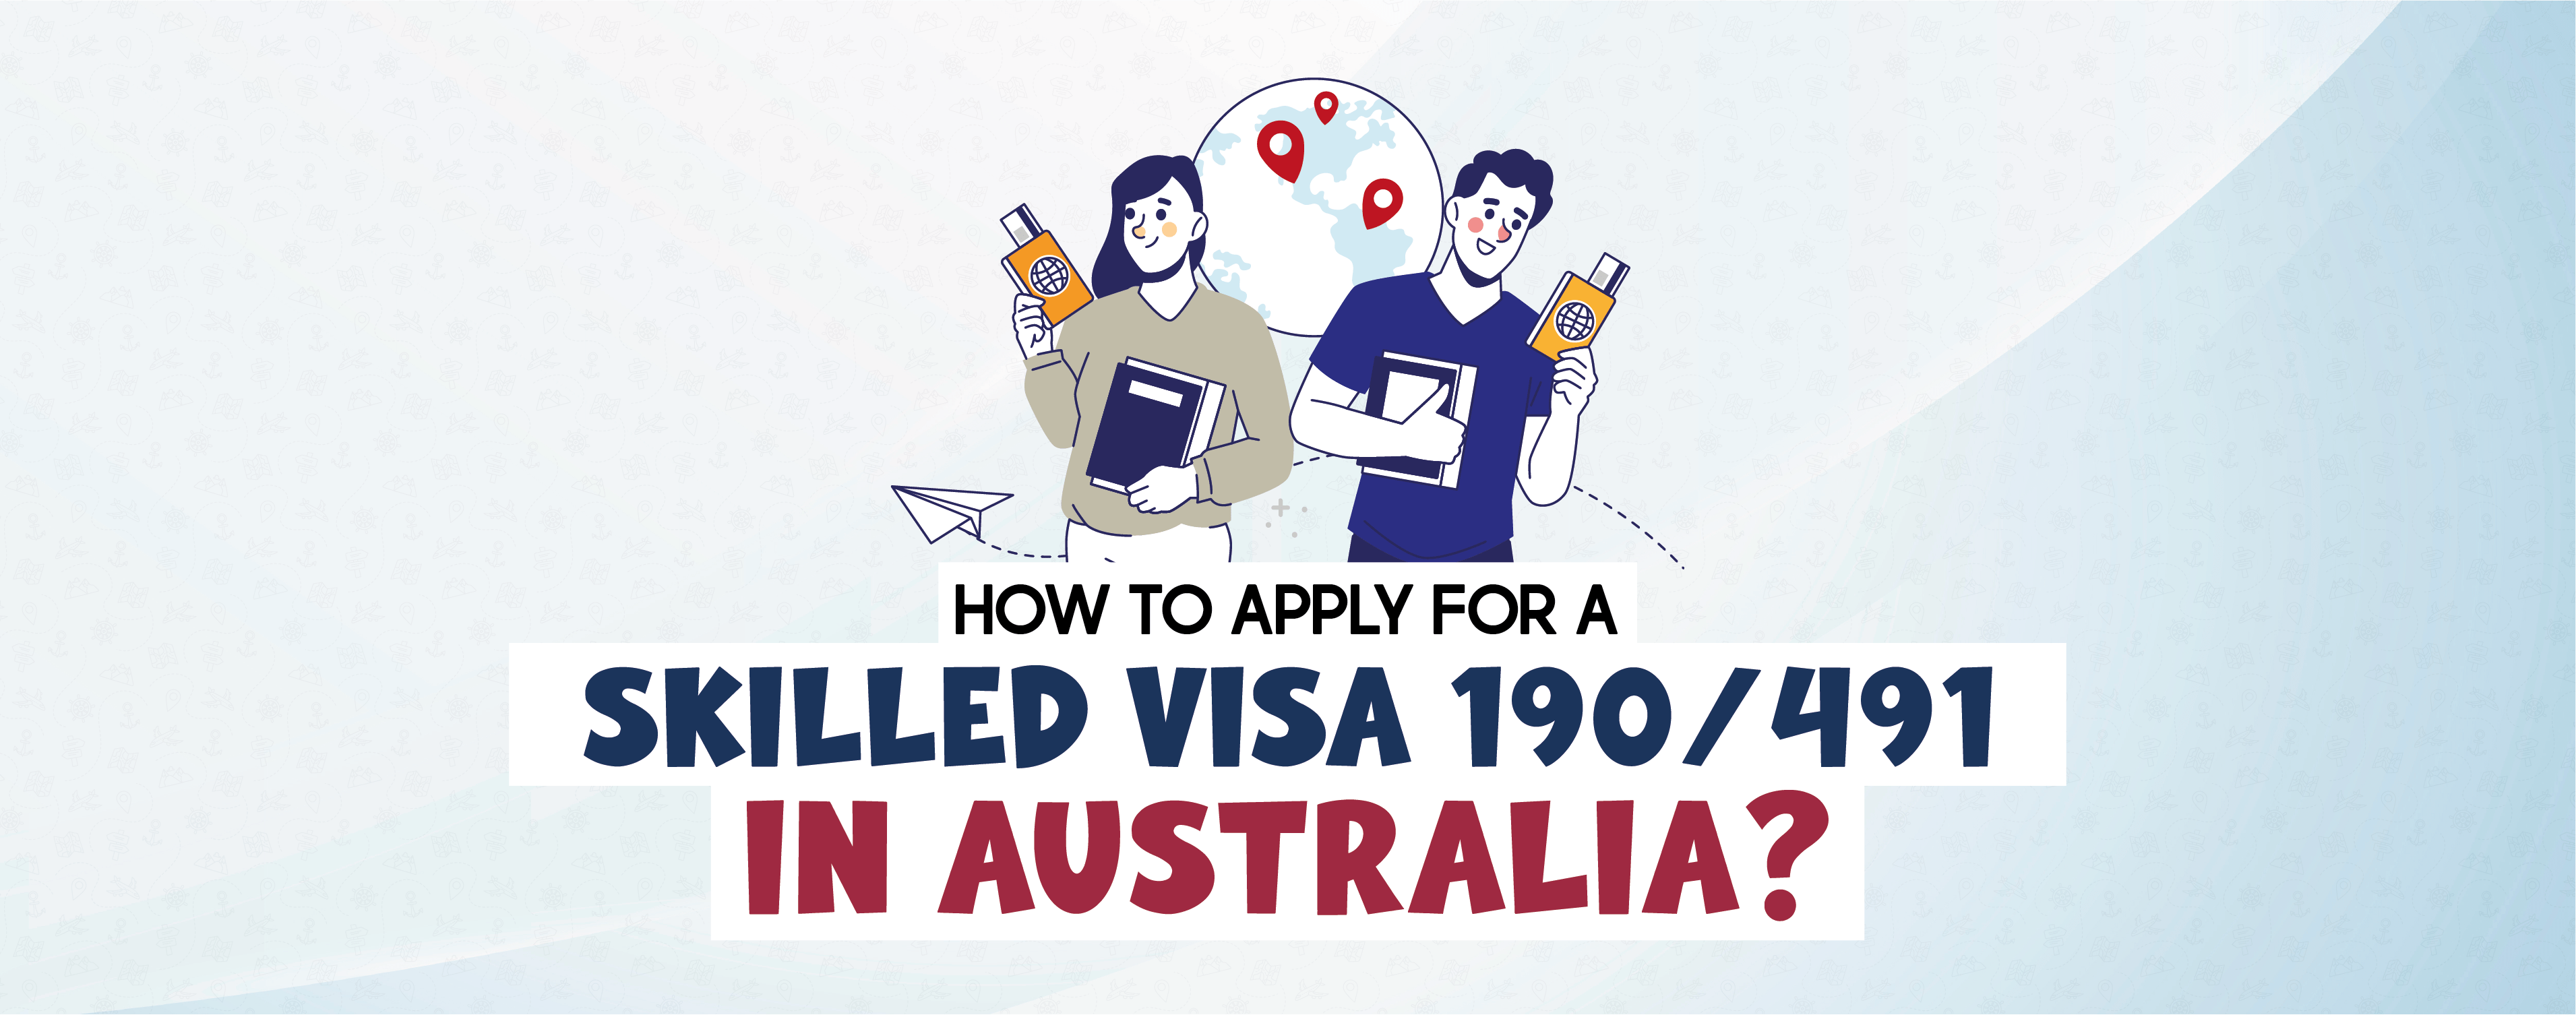 How to Apply for a Skilled Visa 190/491 in Australia?